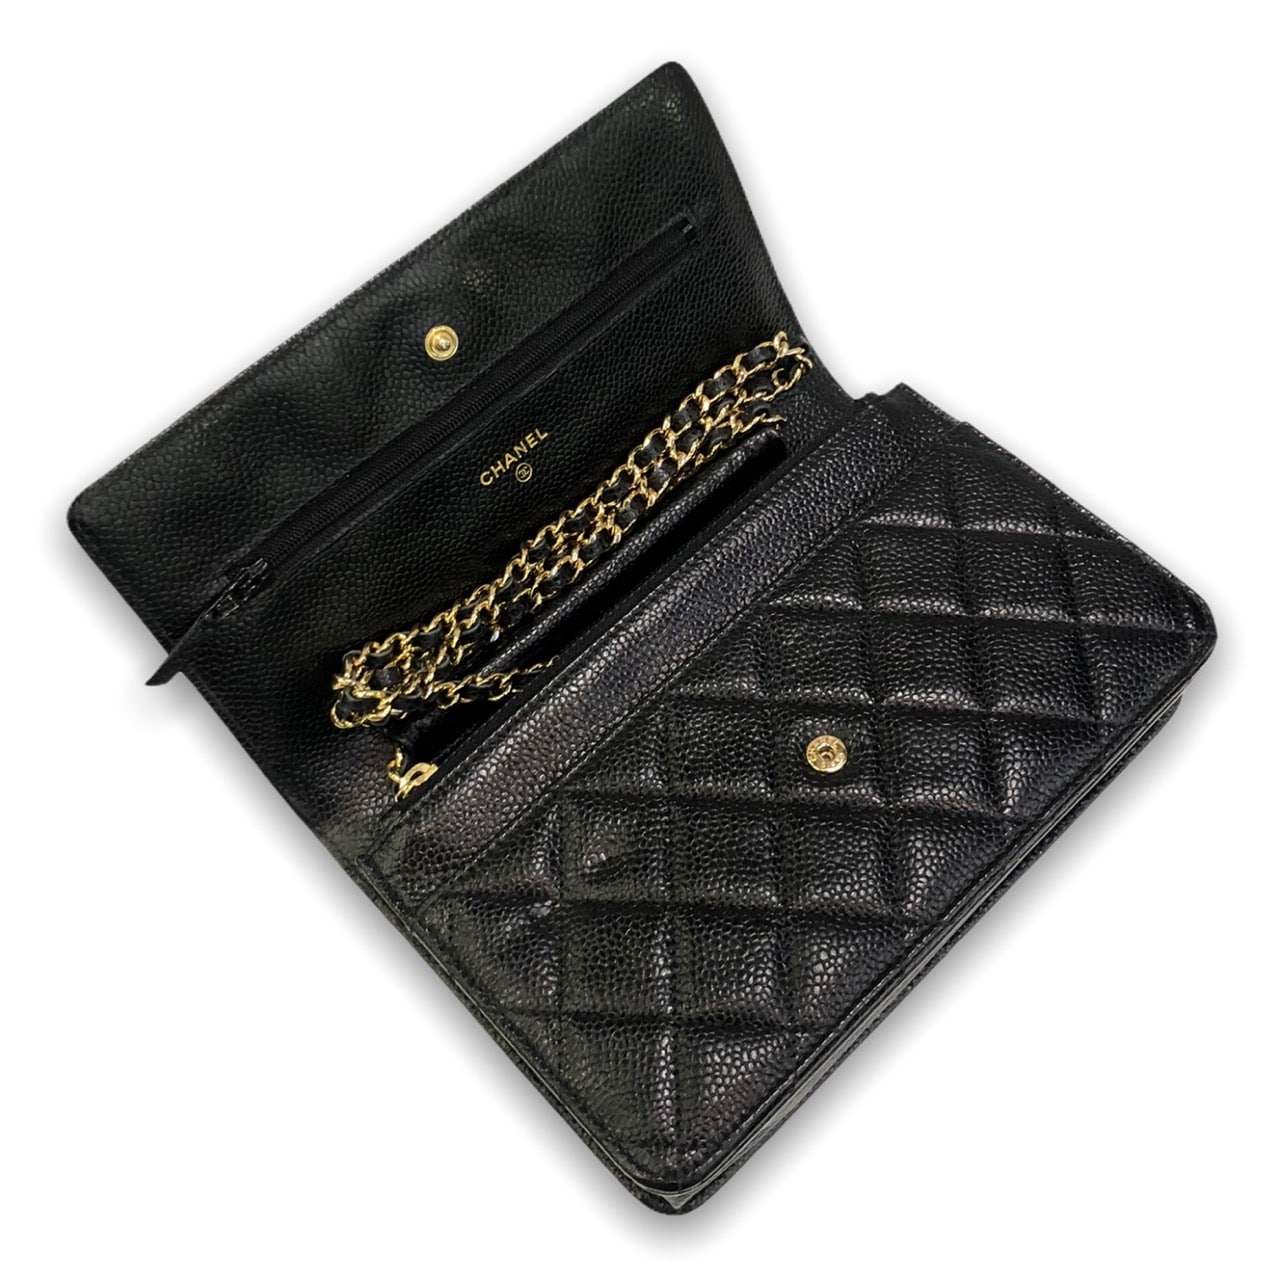 Used!I in good condition Chanel wallet on chain 7.5” black caviar with gold hardware Holo 22